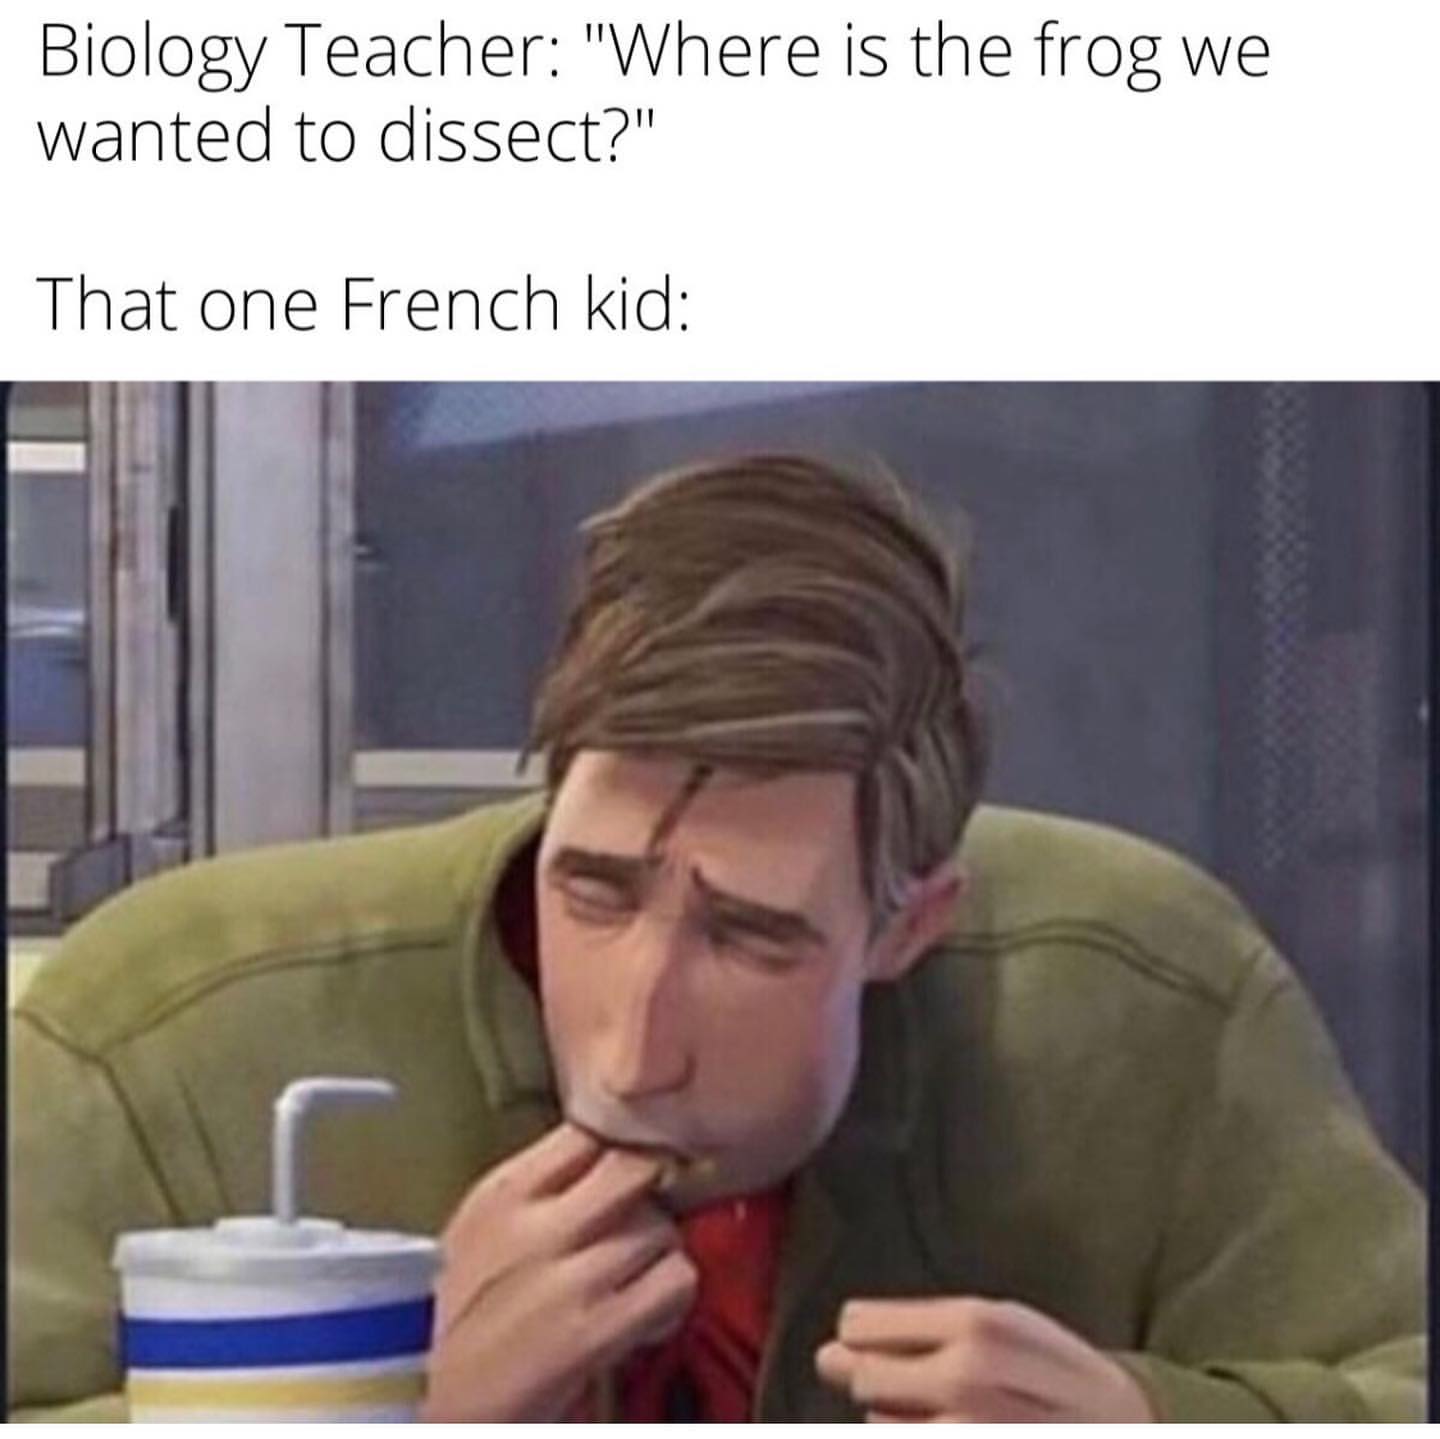 Biology Teacher: "Where is the frog we wanted to dissect?" That one French kid: